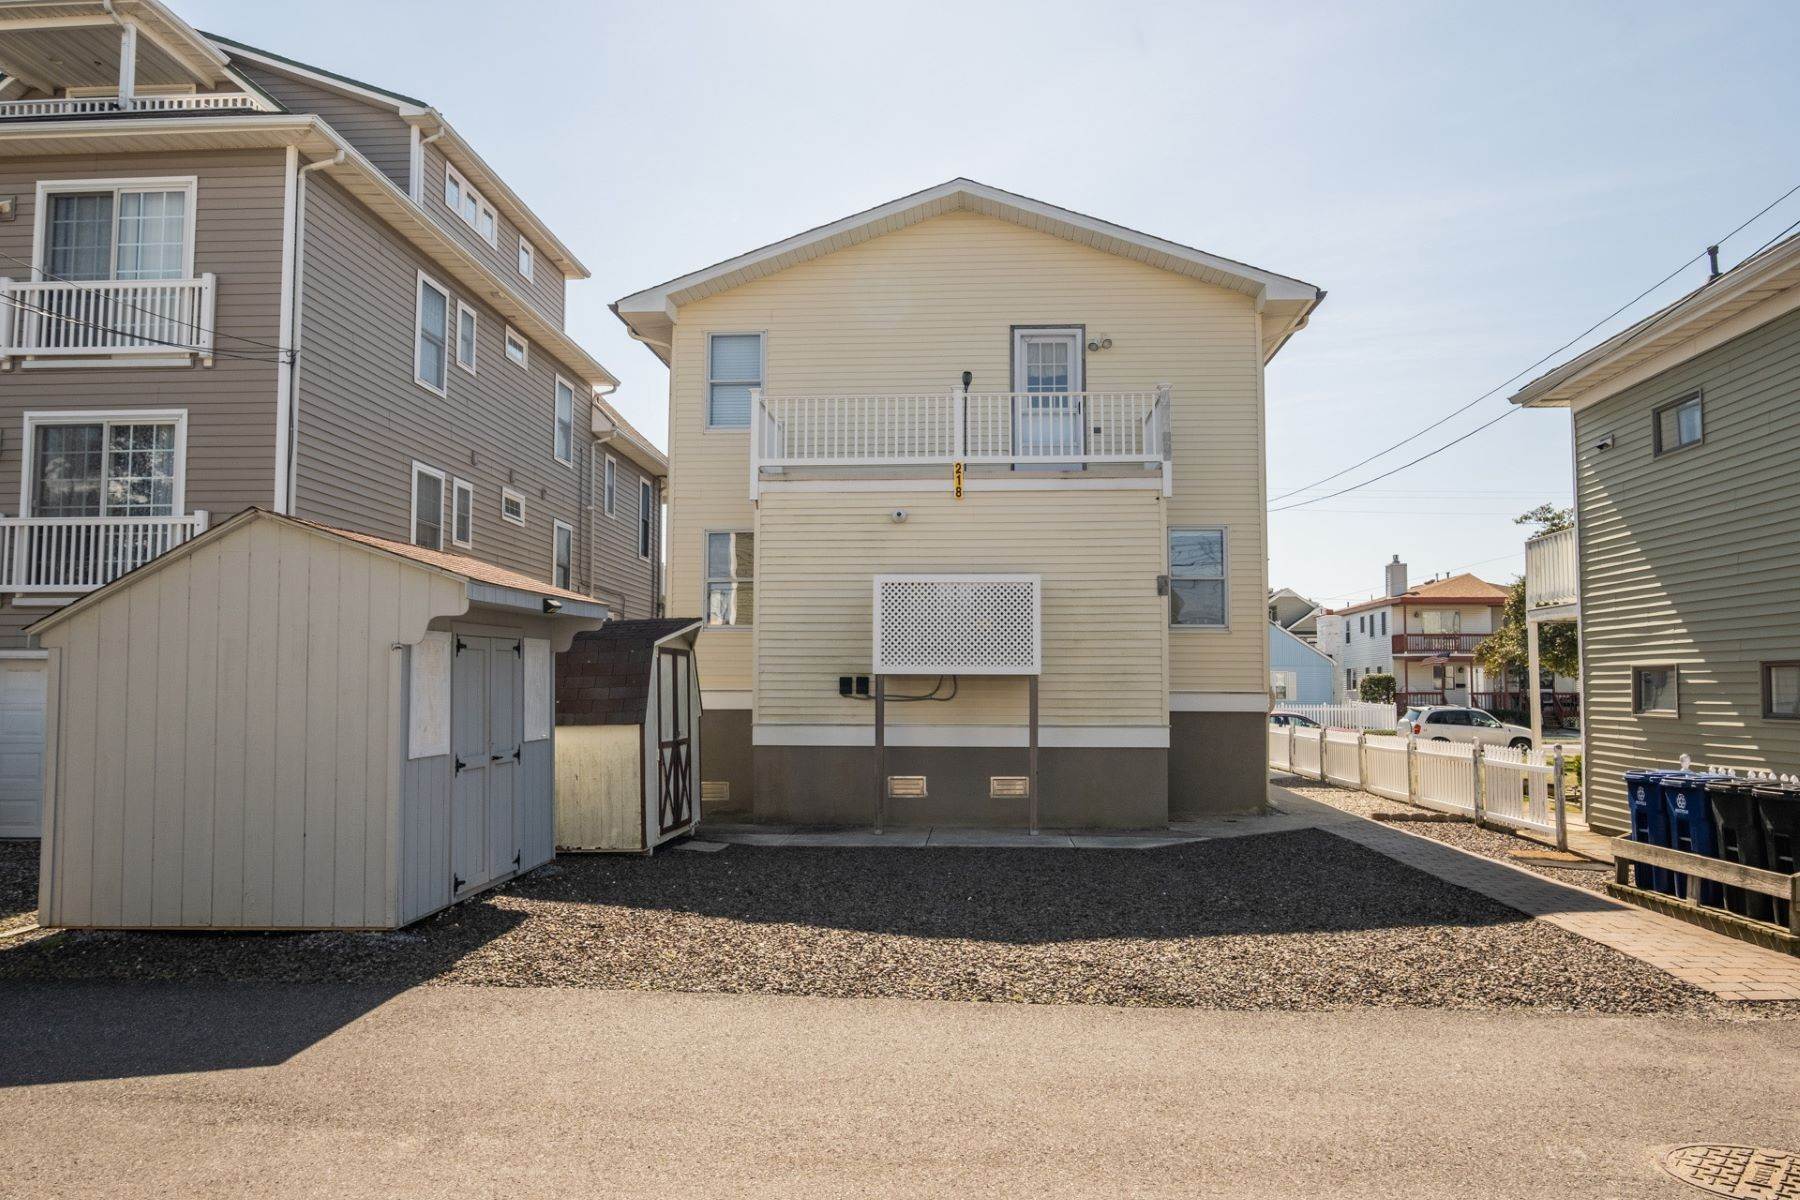 28. Condominiums for Sale at 218 Central Avenue, Unit 1 Ocean City, New Jersey 08226 United States